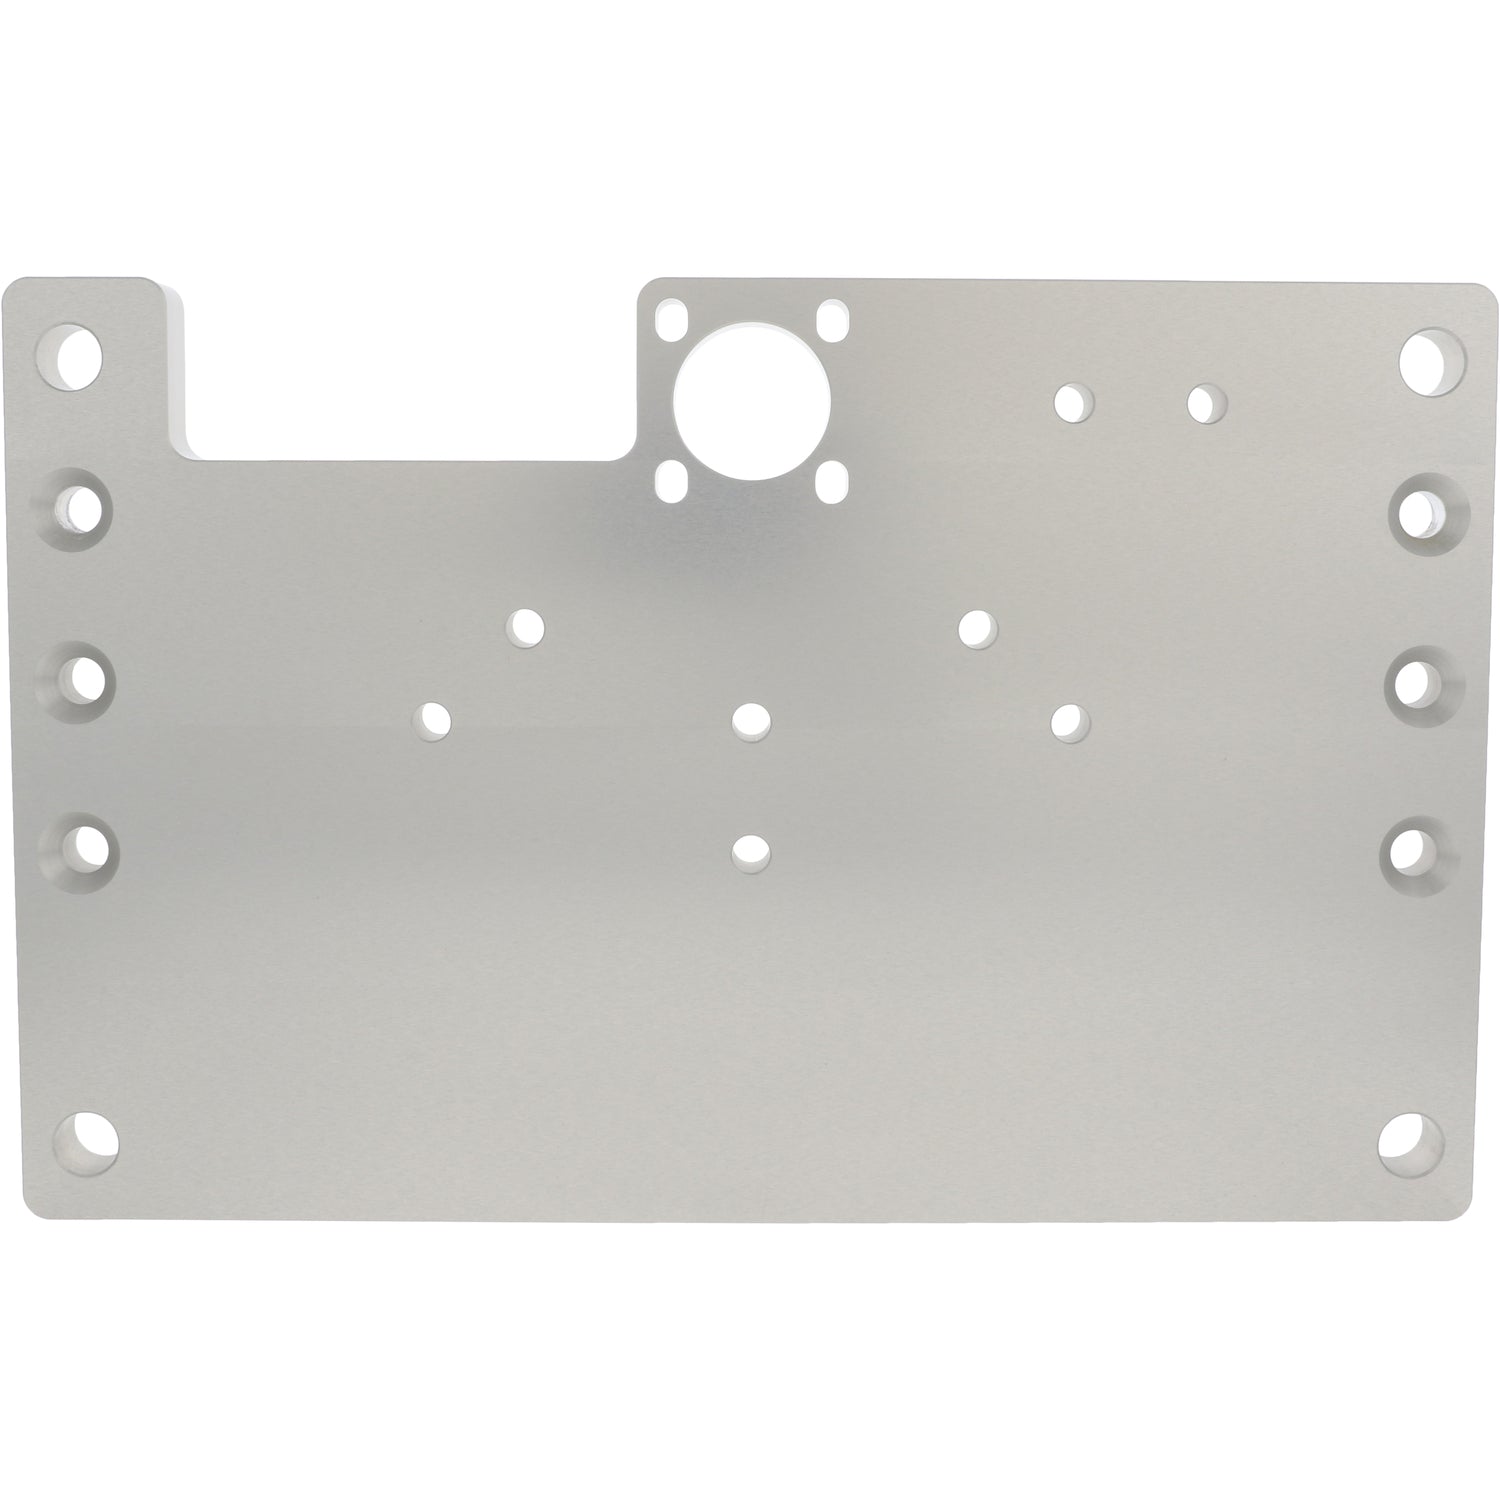 Machined hard anodized aluminum plate with multiple mounting holes. Part shown on white background. 